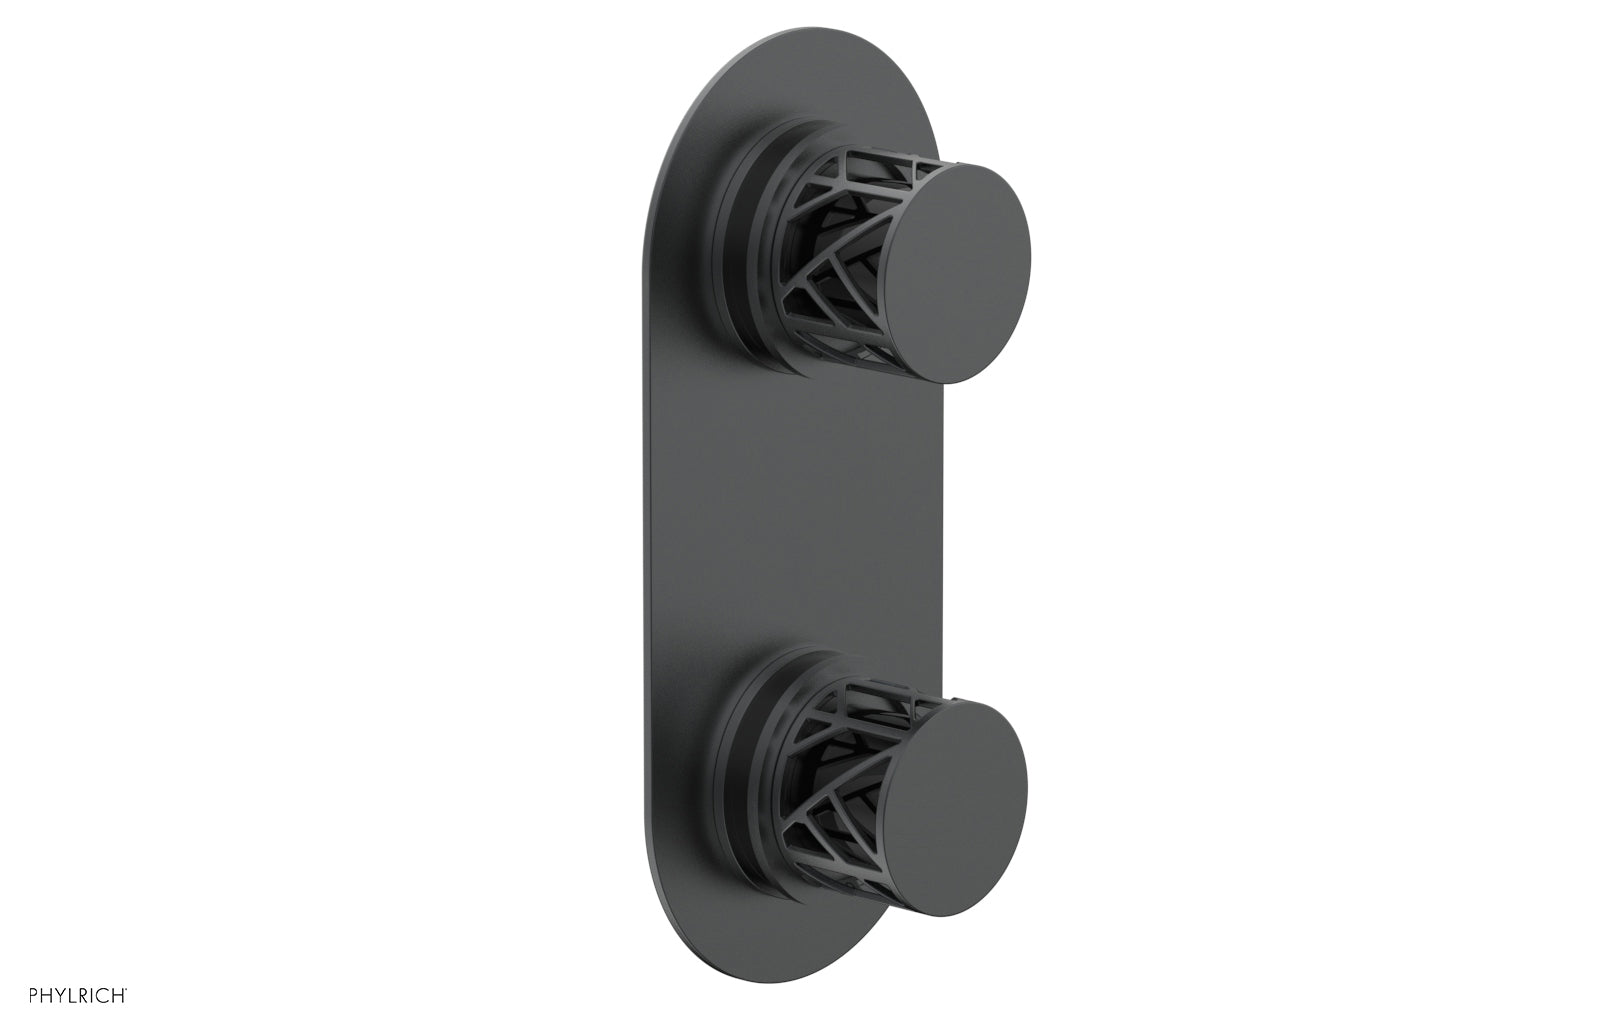 Phylrich JOLIE Thermostatic Valve with Volume Control or Diverter with "Black" Accents